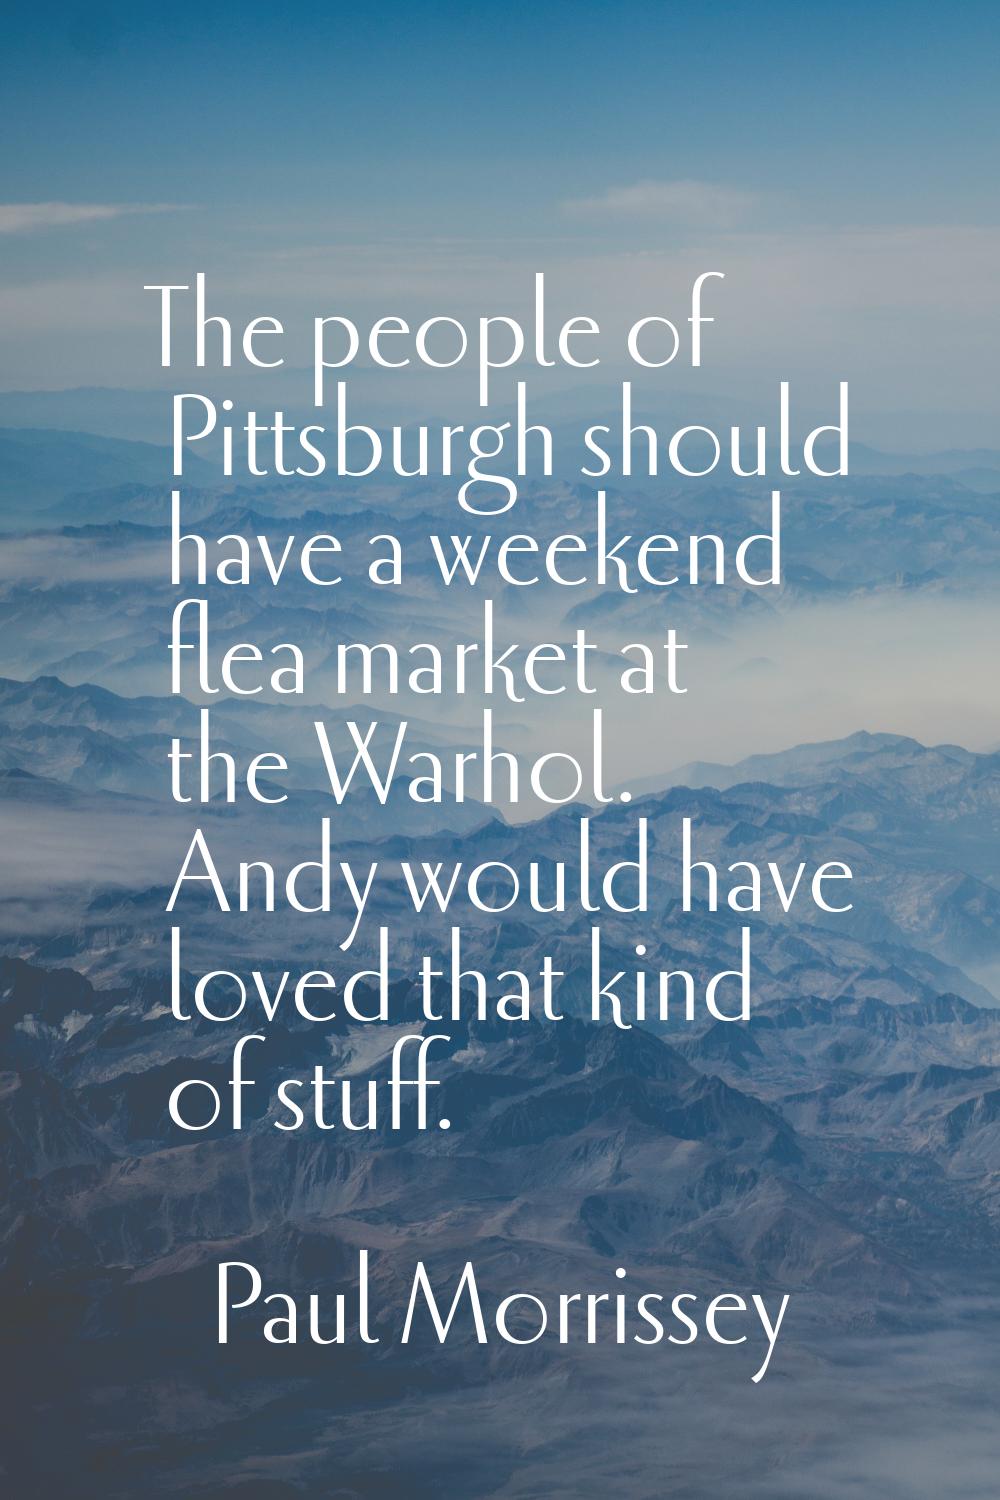 The people of Pittsburgh should have a weekend flea market at the Warhol. Andy would have loved tha